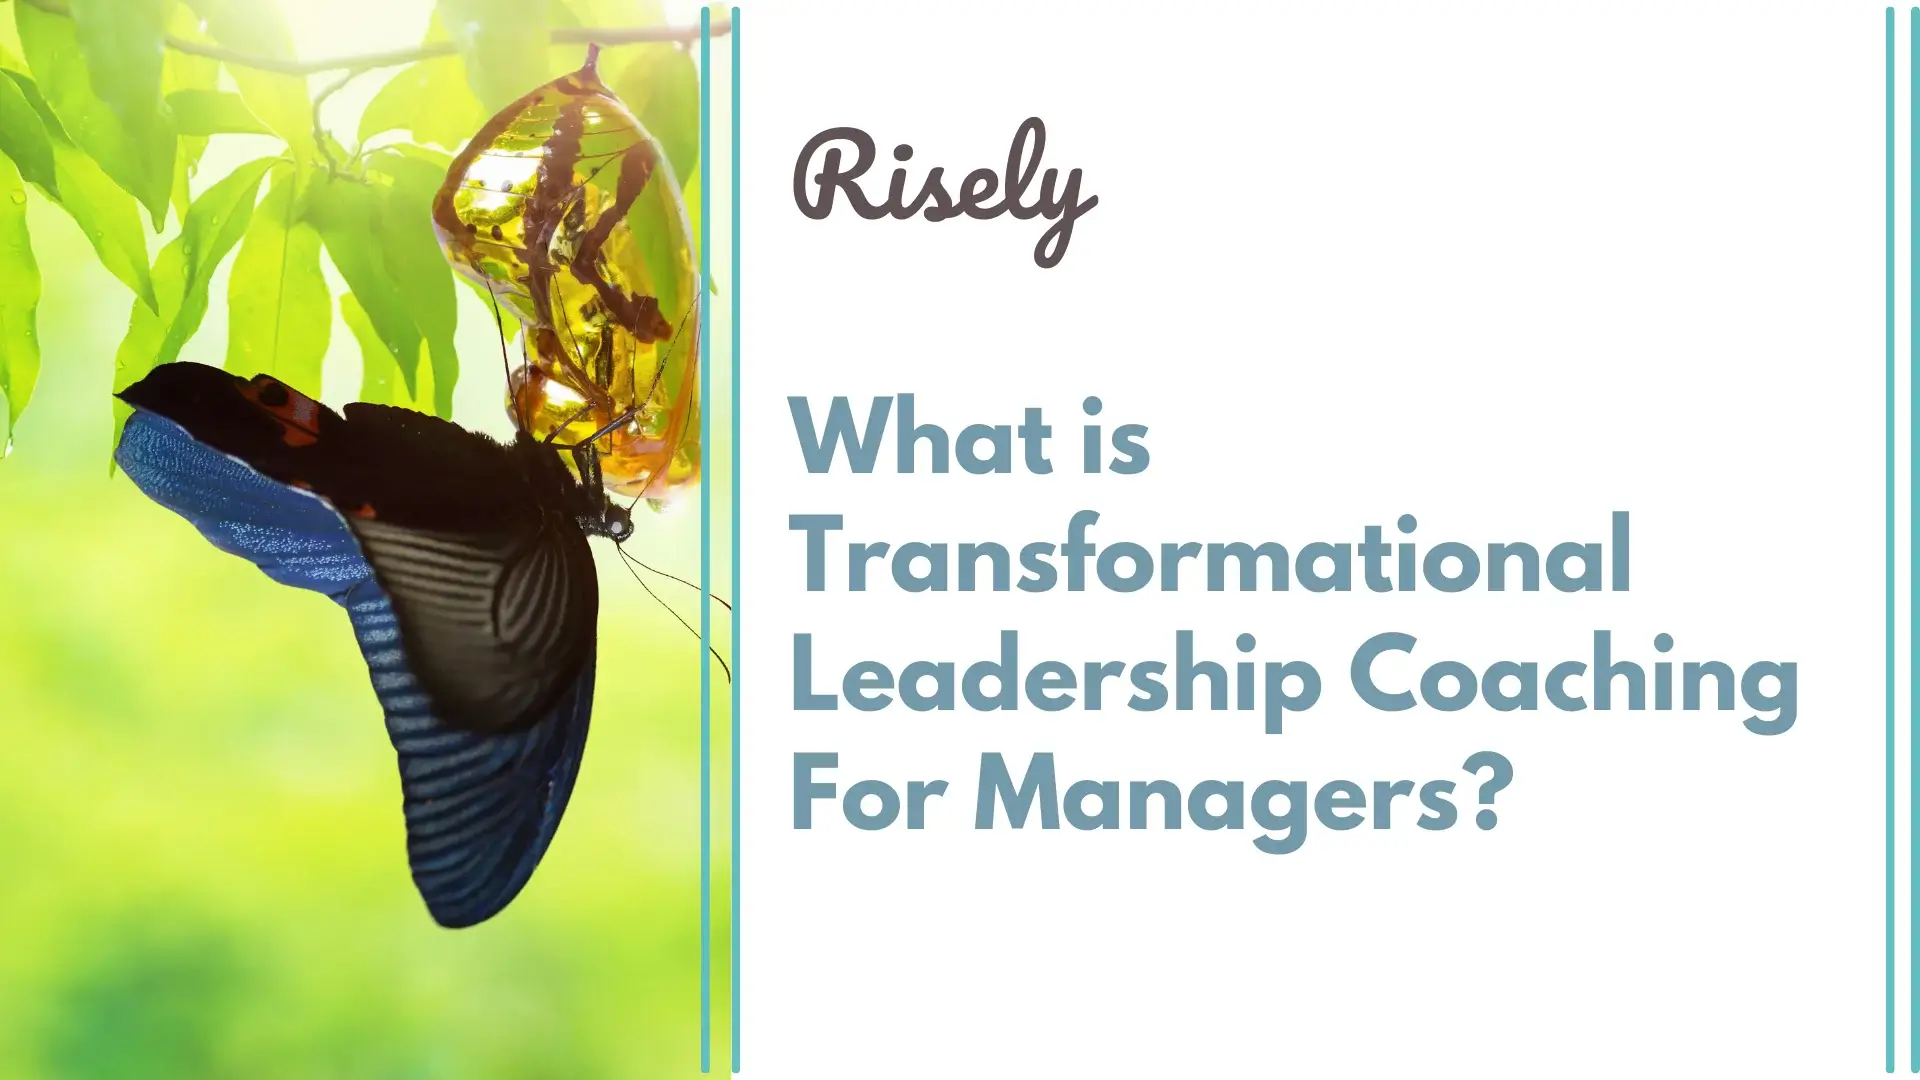 What is Transformational Leadership Coaching For Managers?